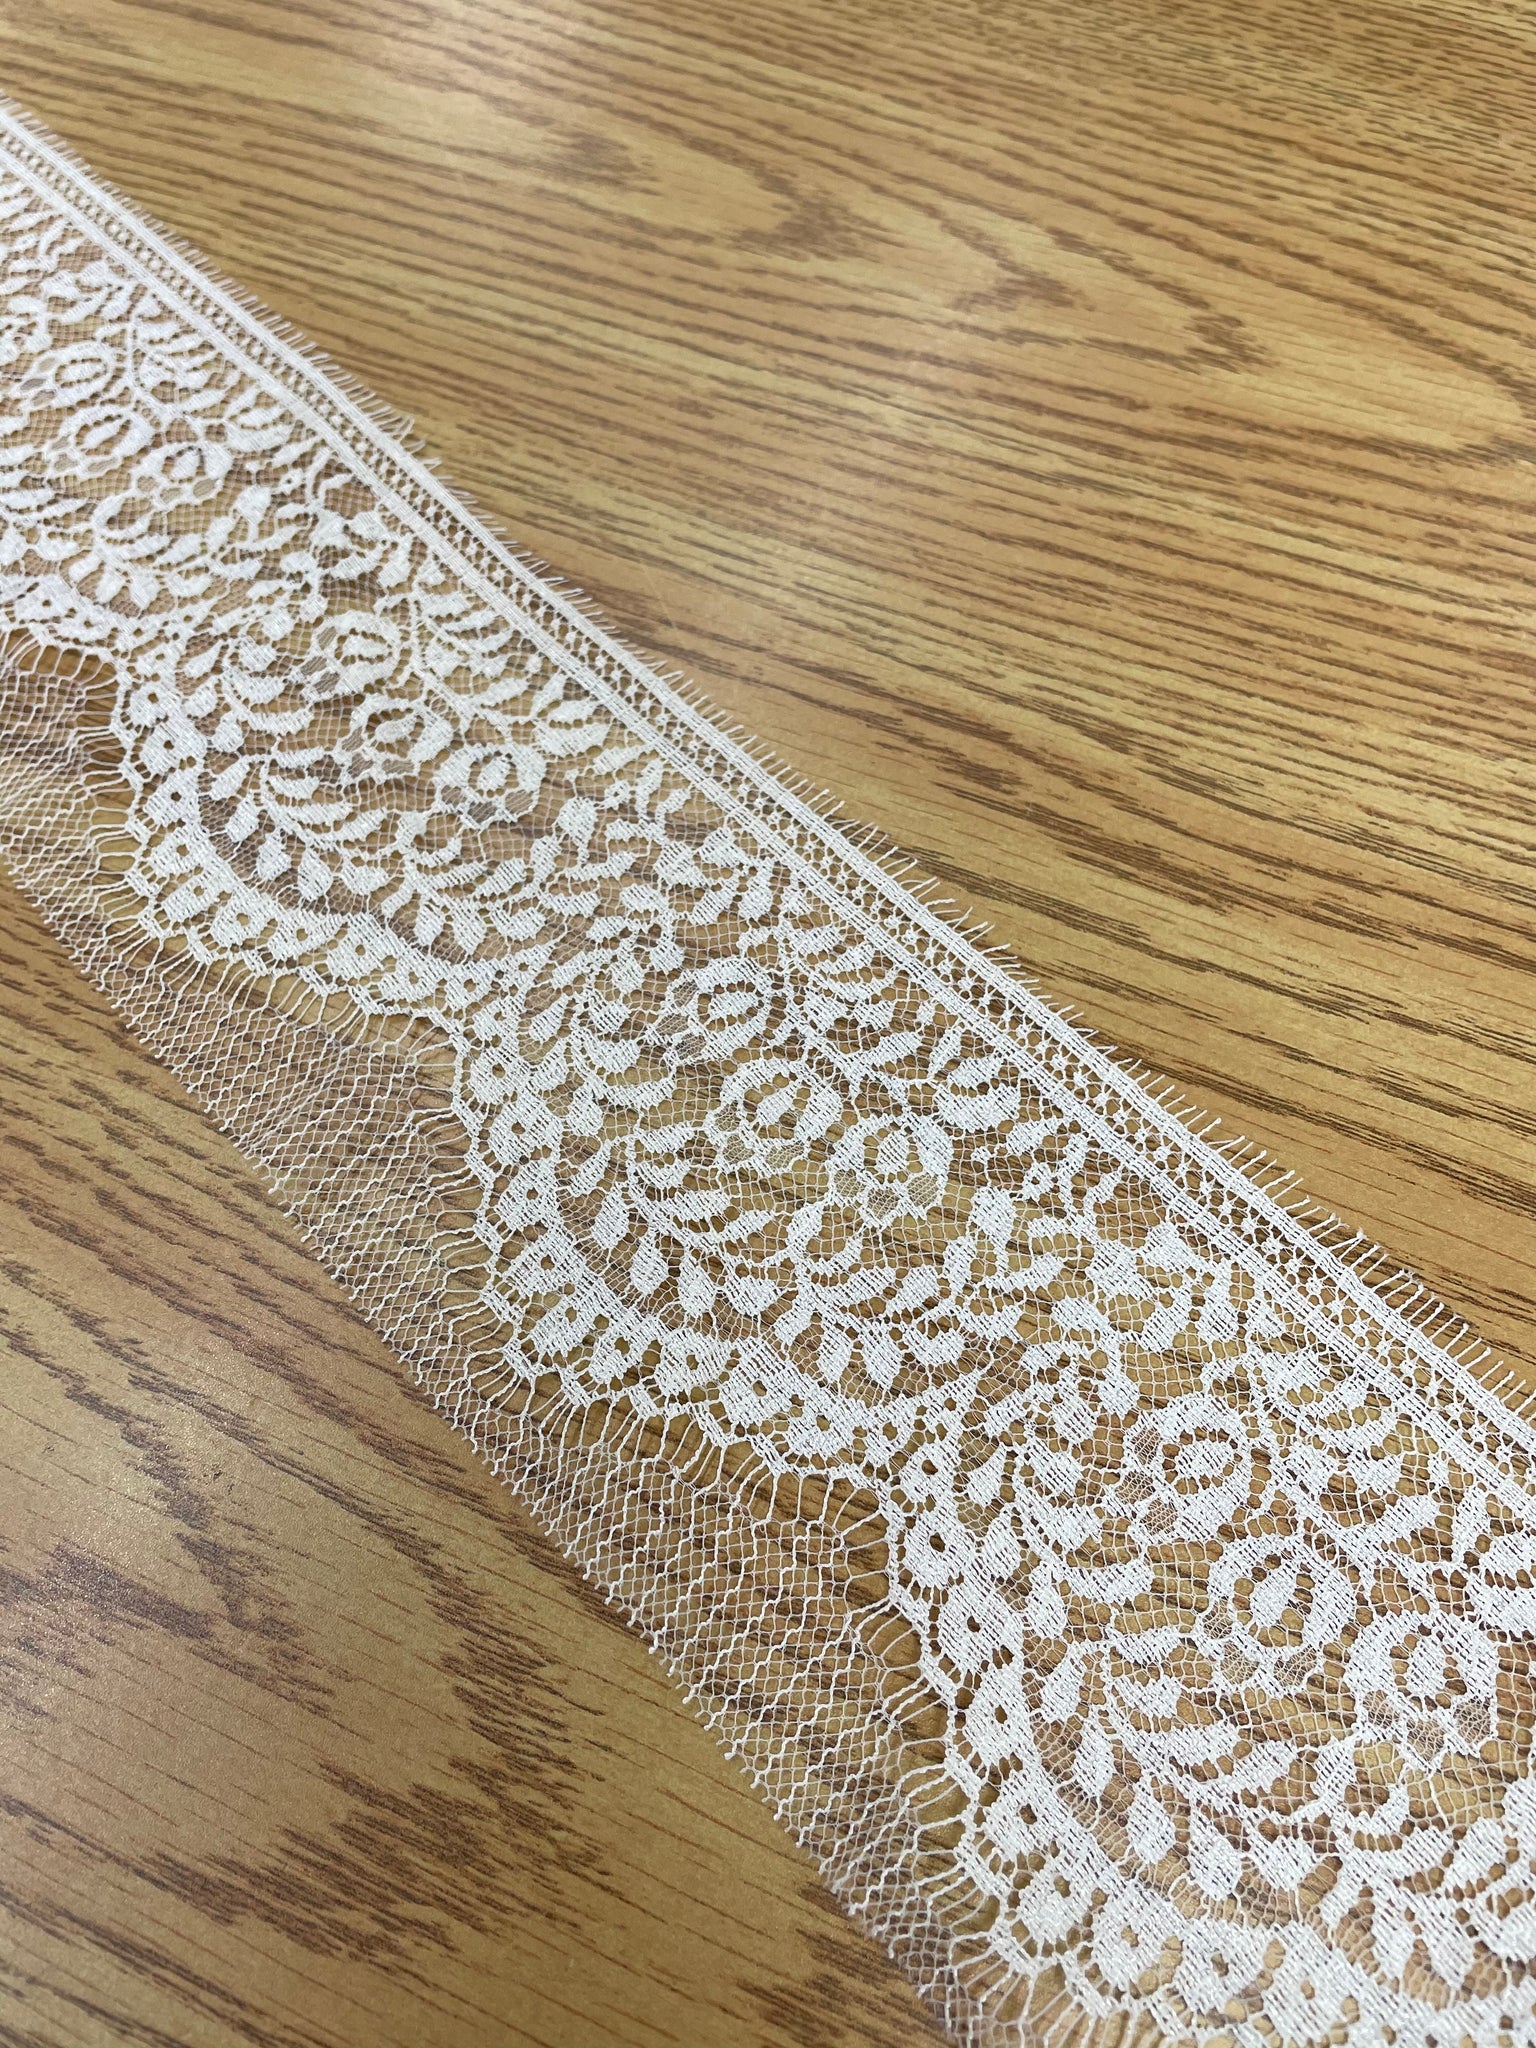 Lace Trim: Trimmings from Japan by Kawaii Lace, SKU 00056844 at $2290 — Buy  Luxury Fabrics Online